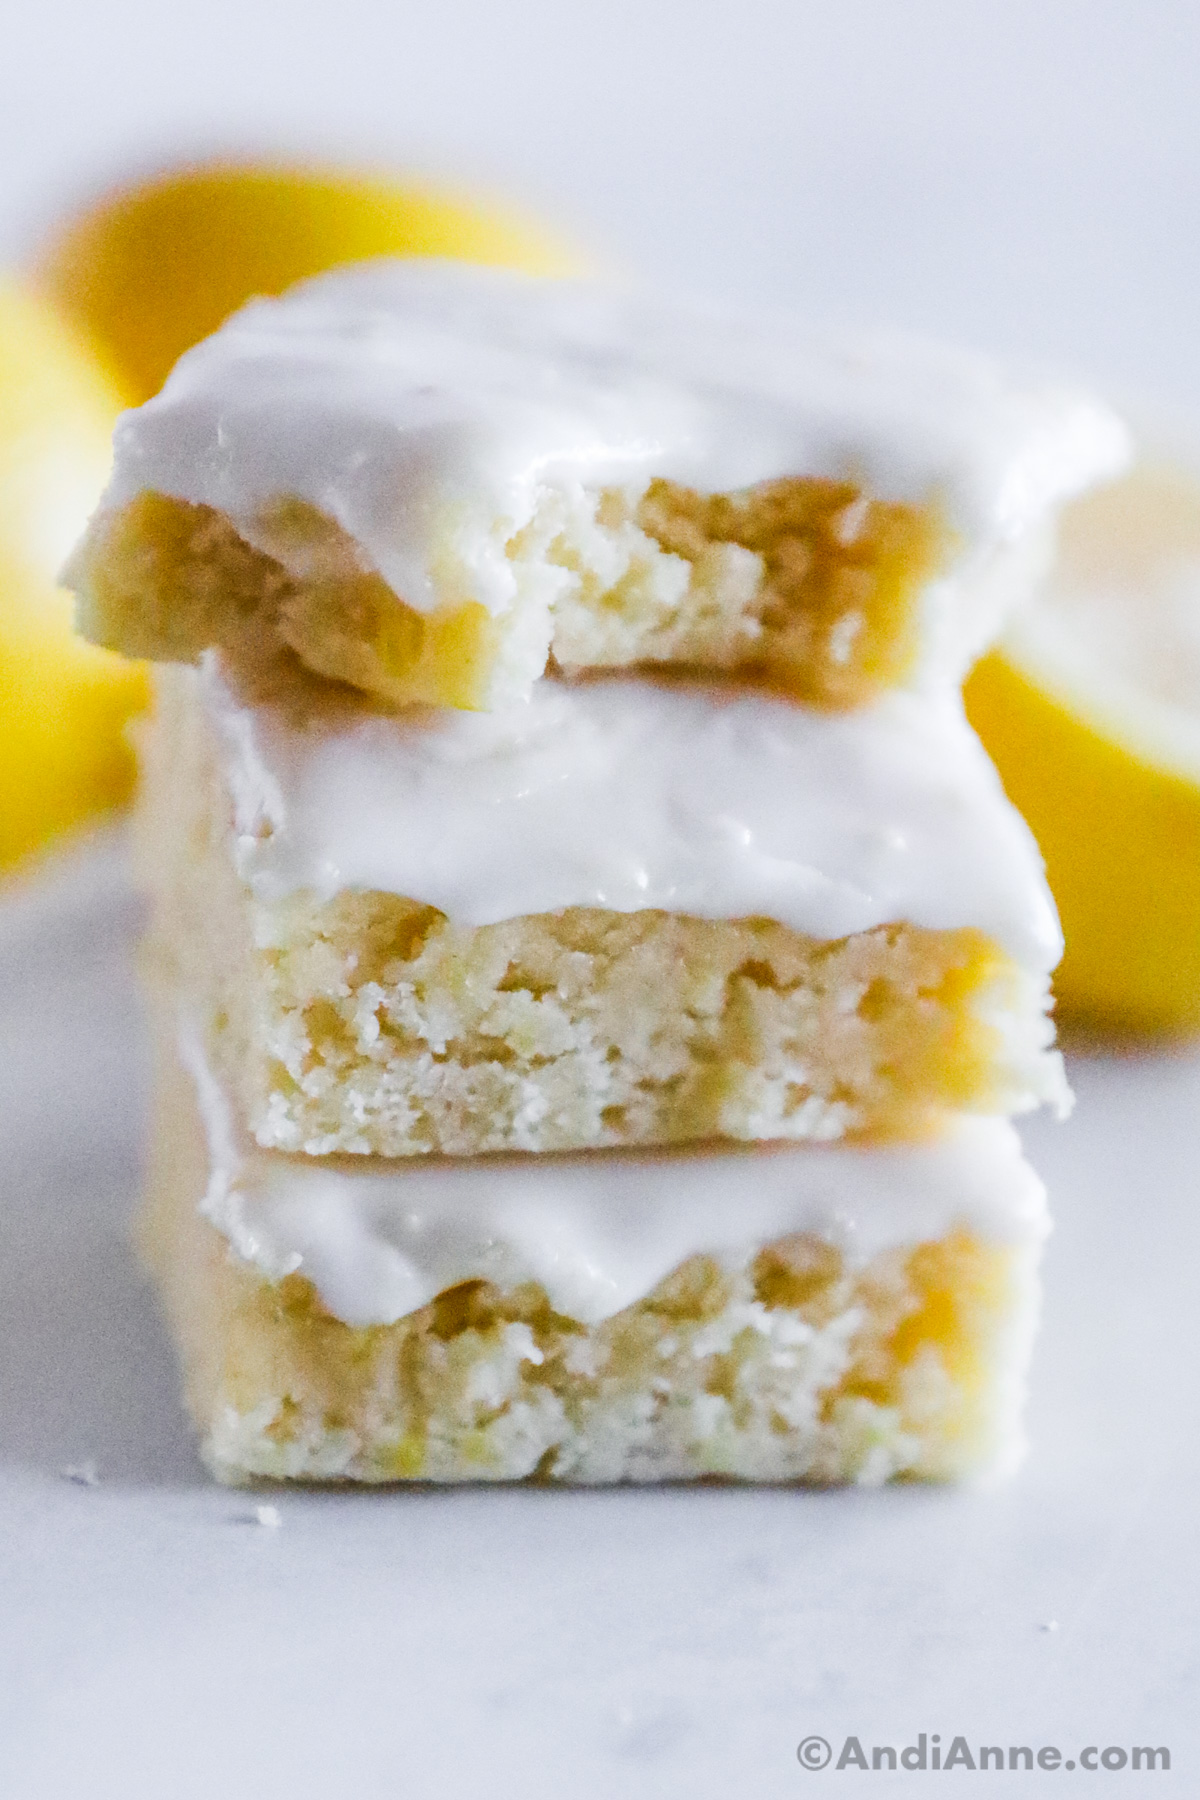 A stack of lemon brownies, one with a bite taken out of it.